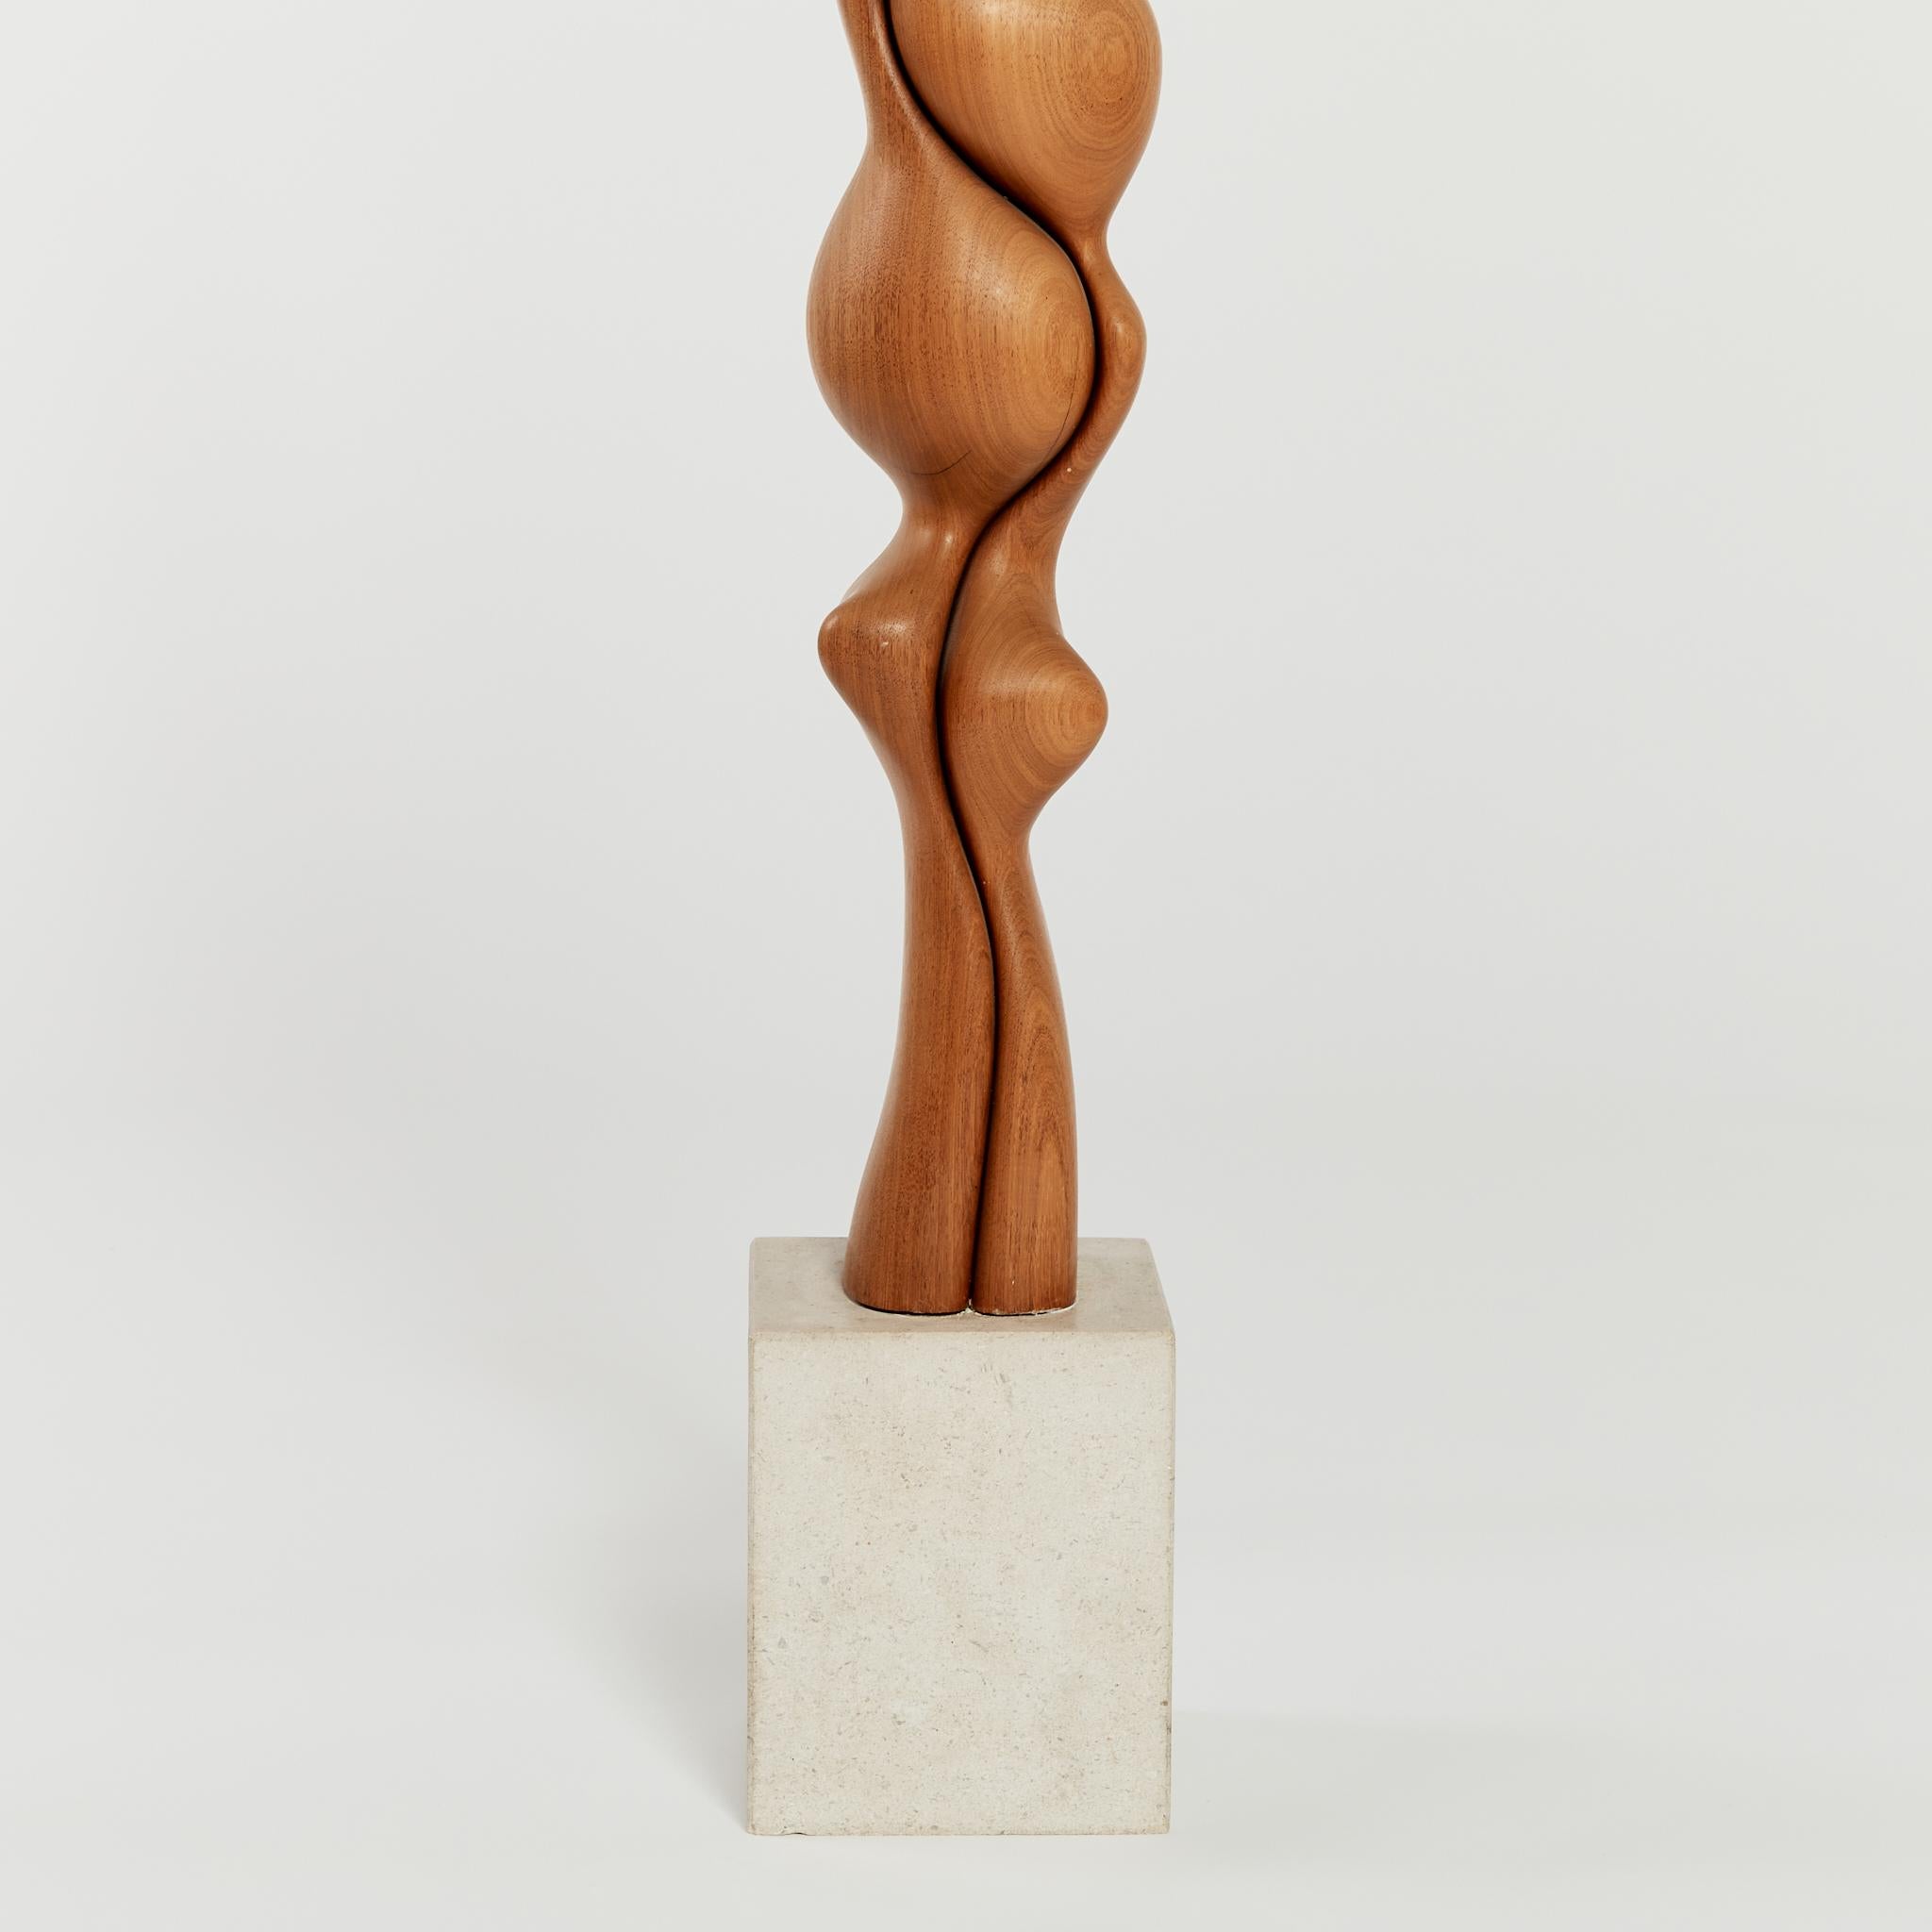 Tall Biomorphic Wood Floor Sculpture with Concrete Plinth 2